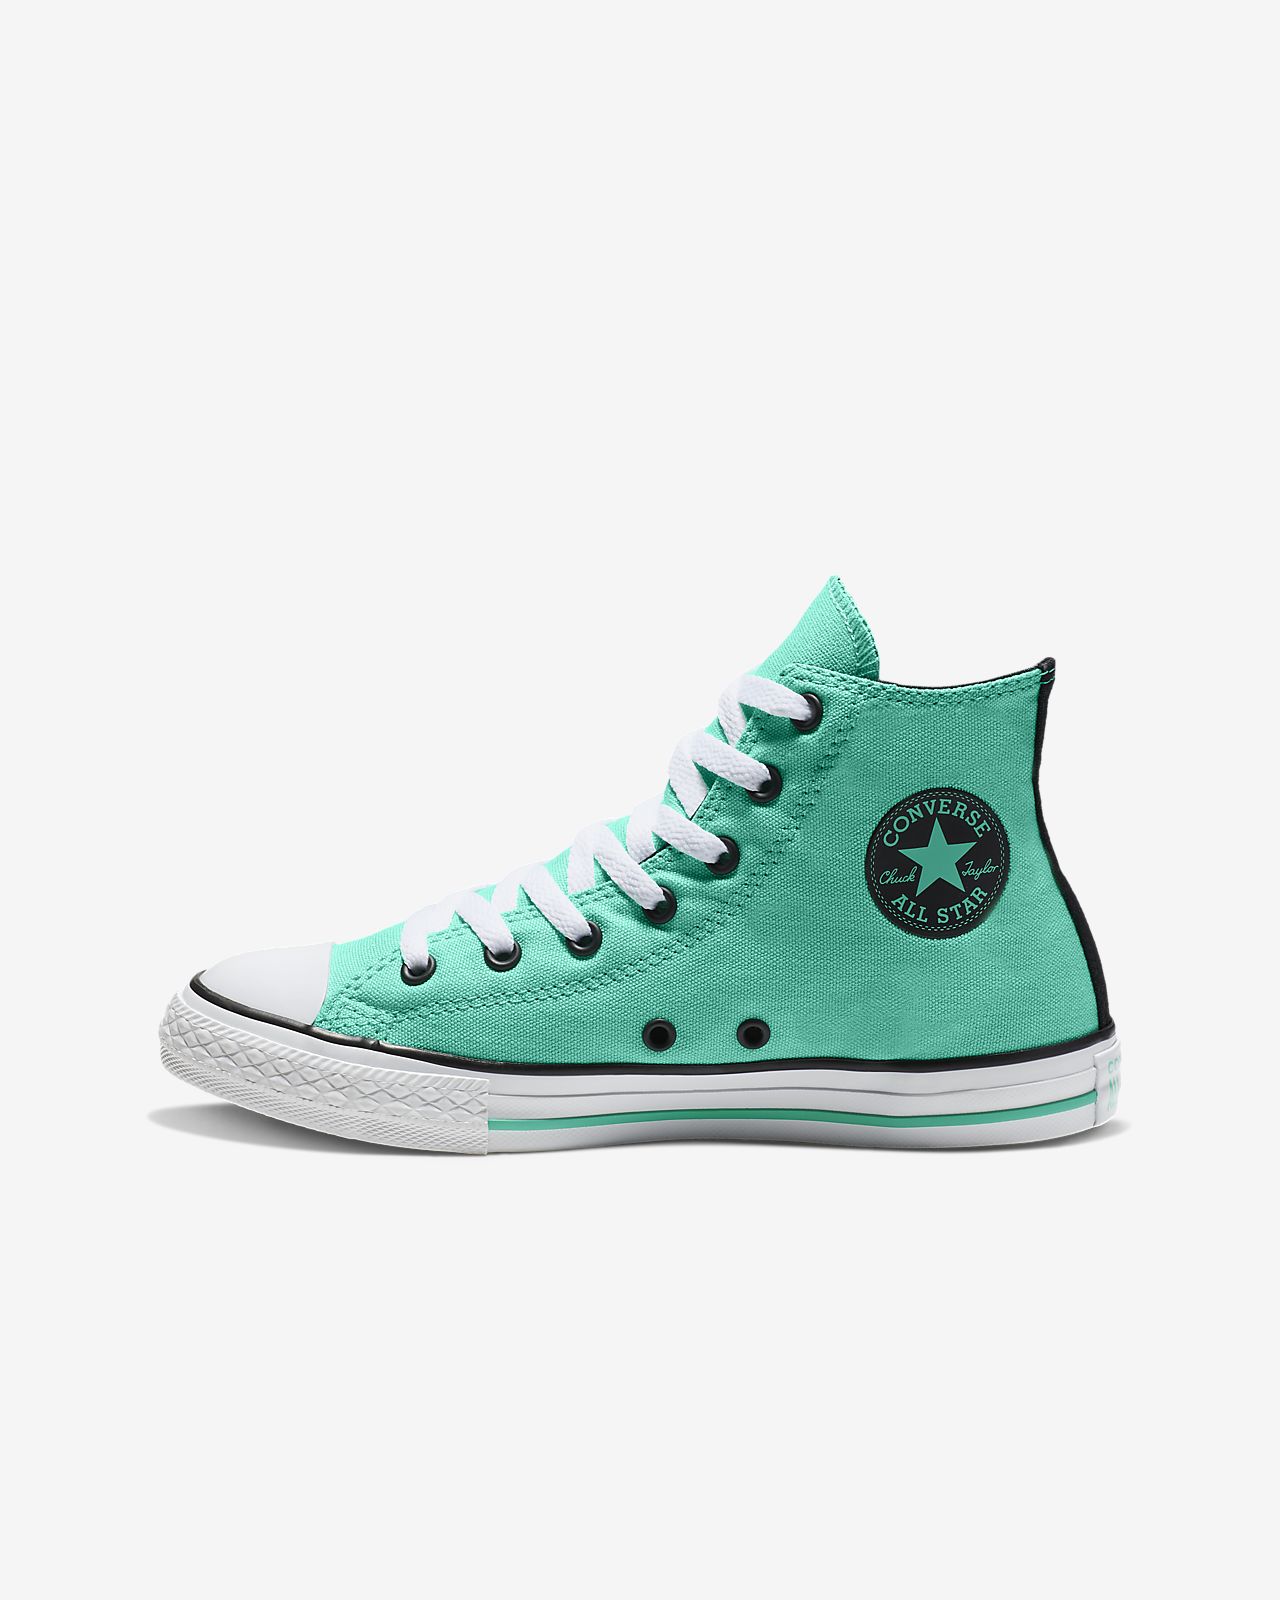 converse turquoise high tops sneakers